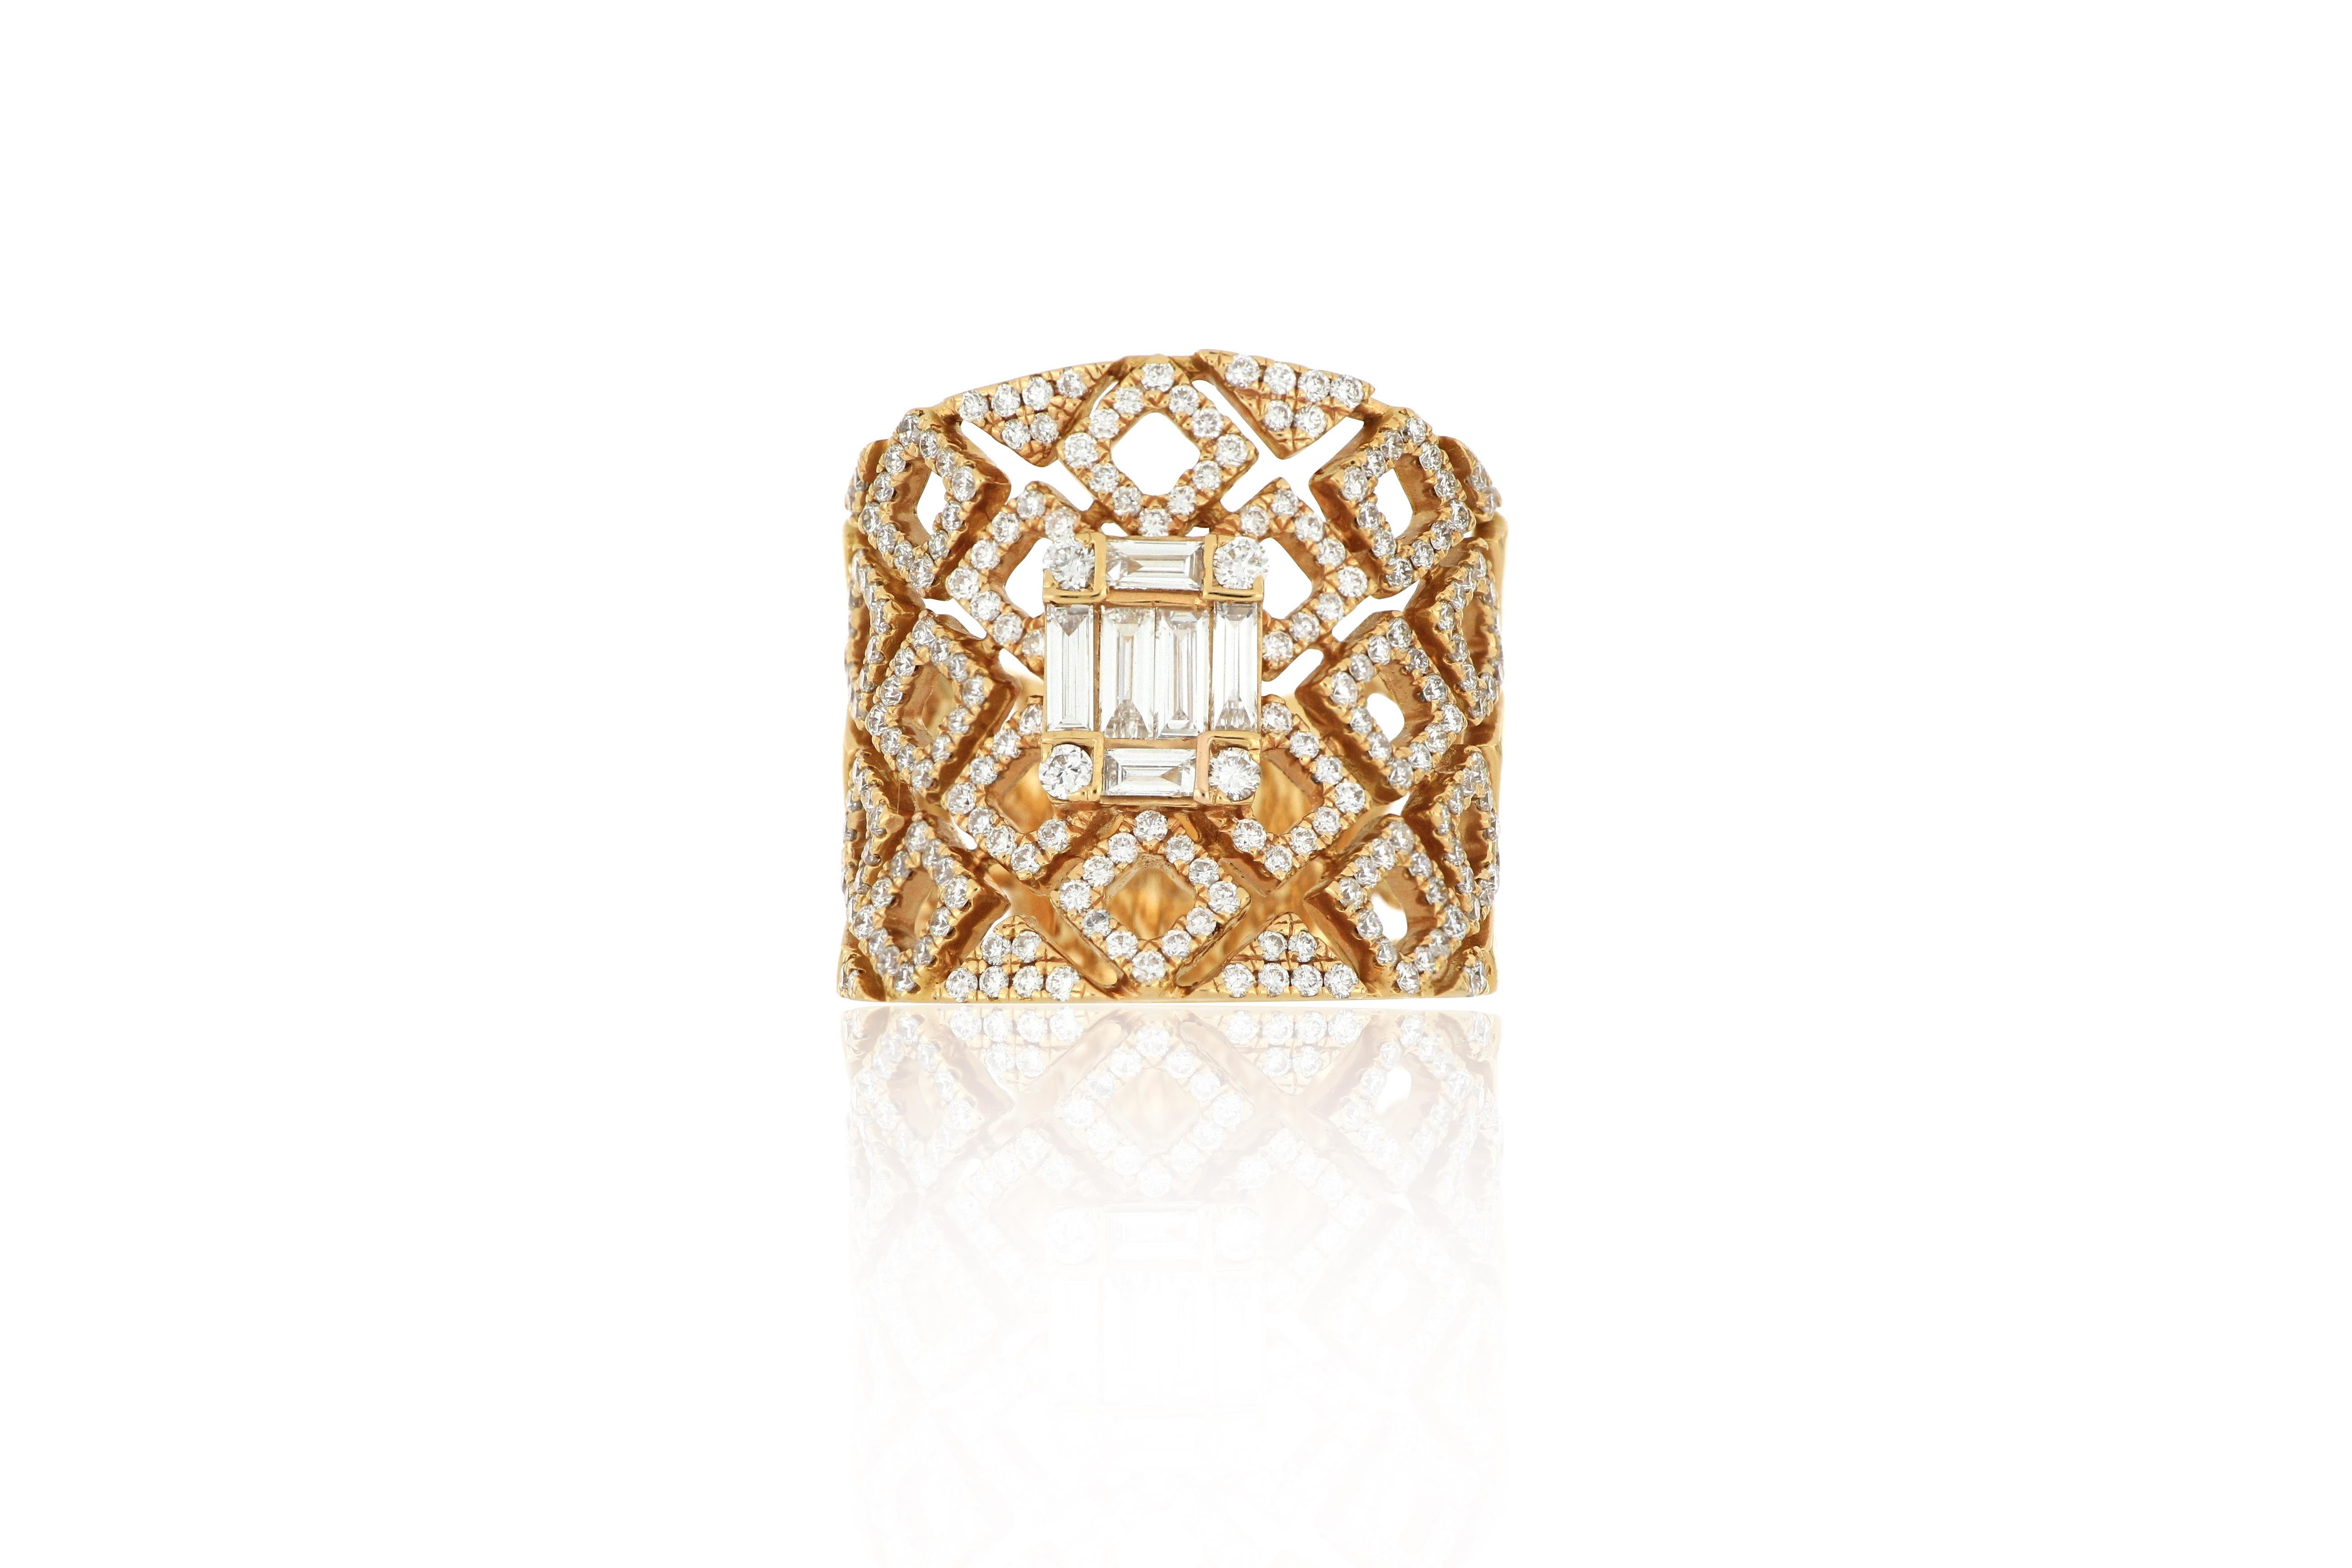 A diamond ring, composed of baguette diamonds and brilliant-cut diamonds, weighing approximately 1.23 carats in total, mounted in 18K rose gold.
O’Che 1867 was founded one and a half centuries ago in Macau. The brand is renowned for its high